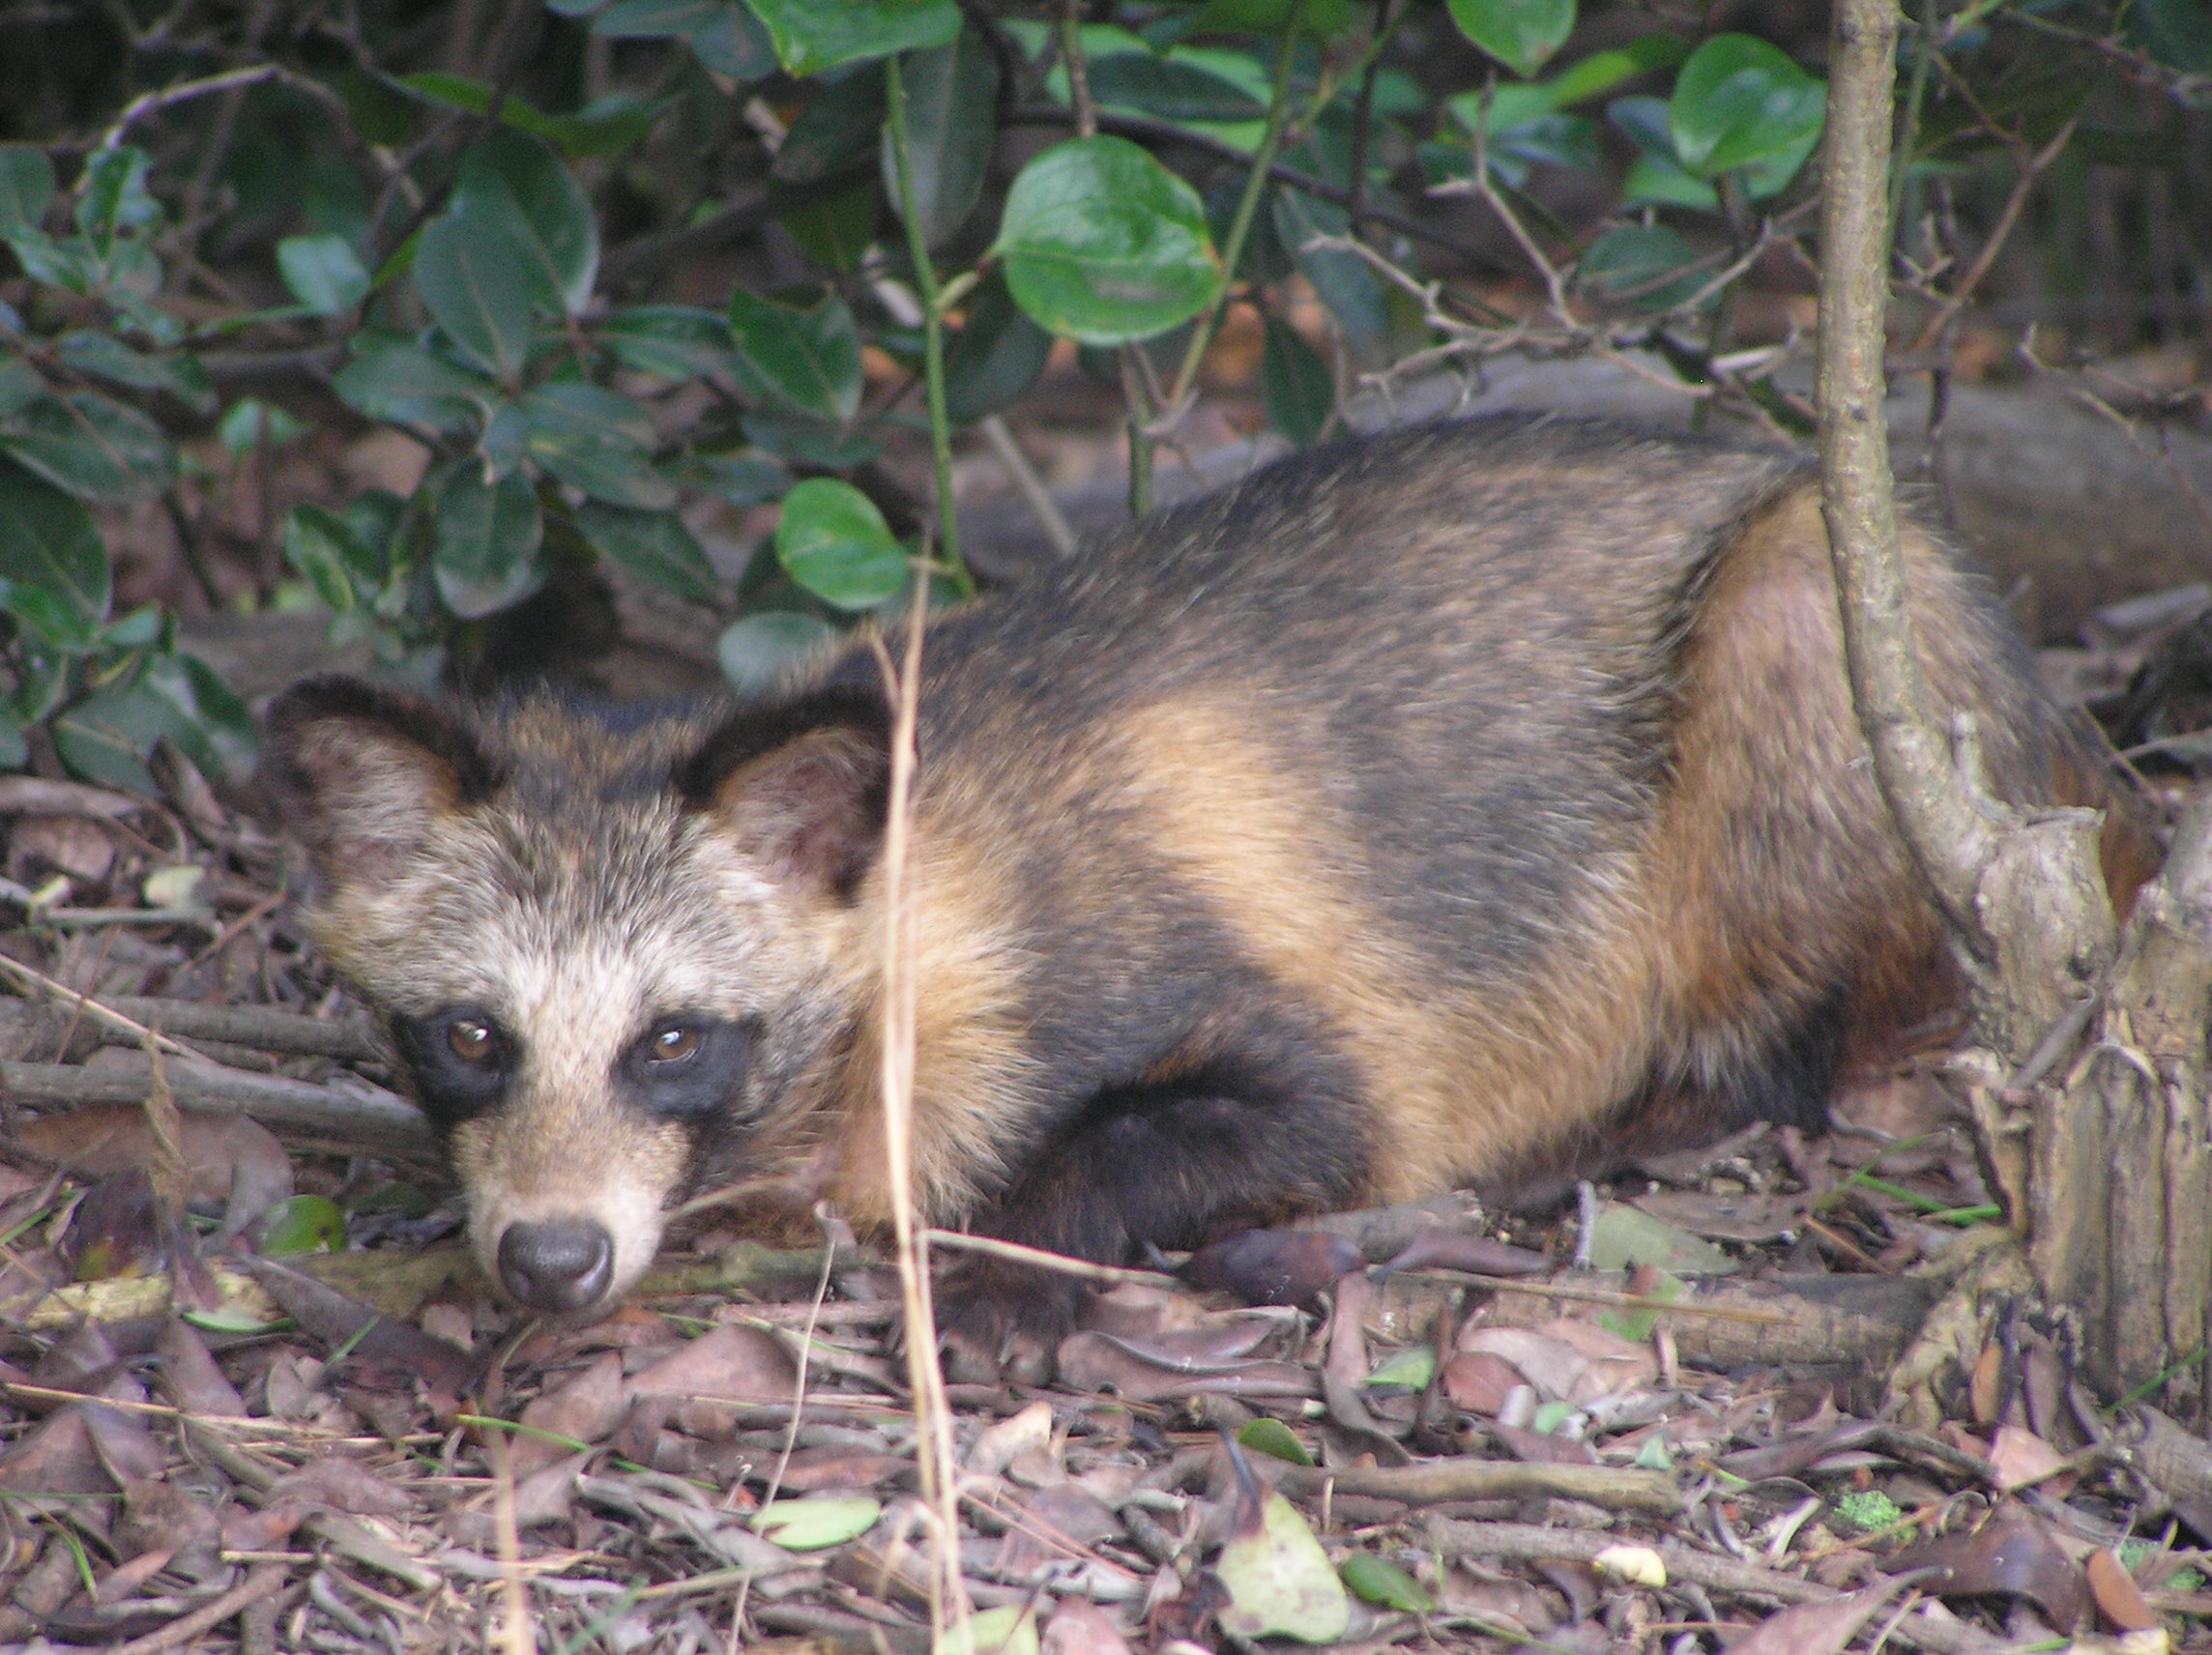 Raccoon dog. Image credit: Wikipedia, Prue Simmons (CC by 2.0)